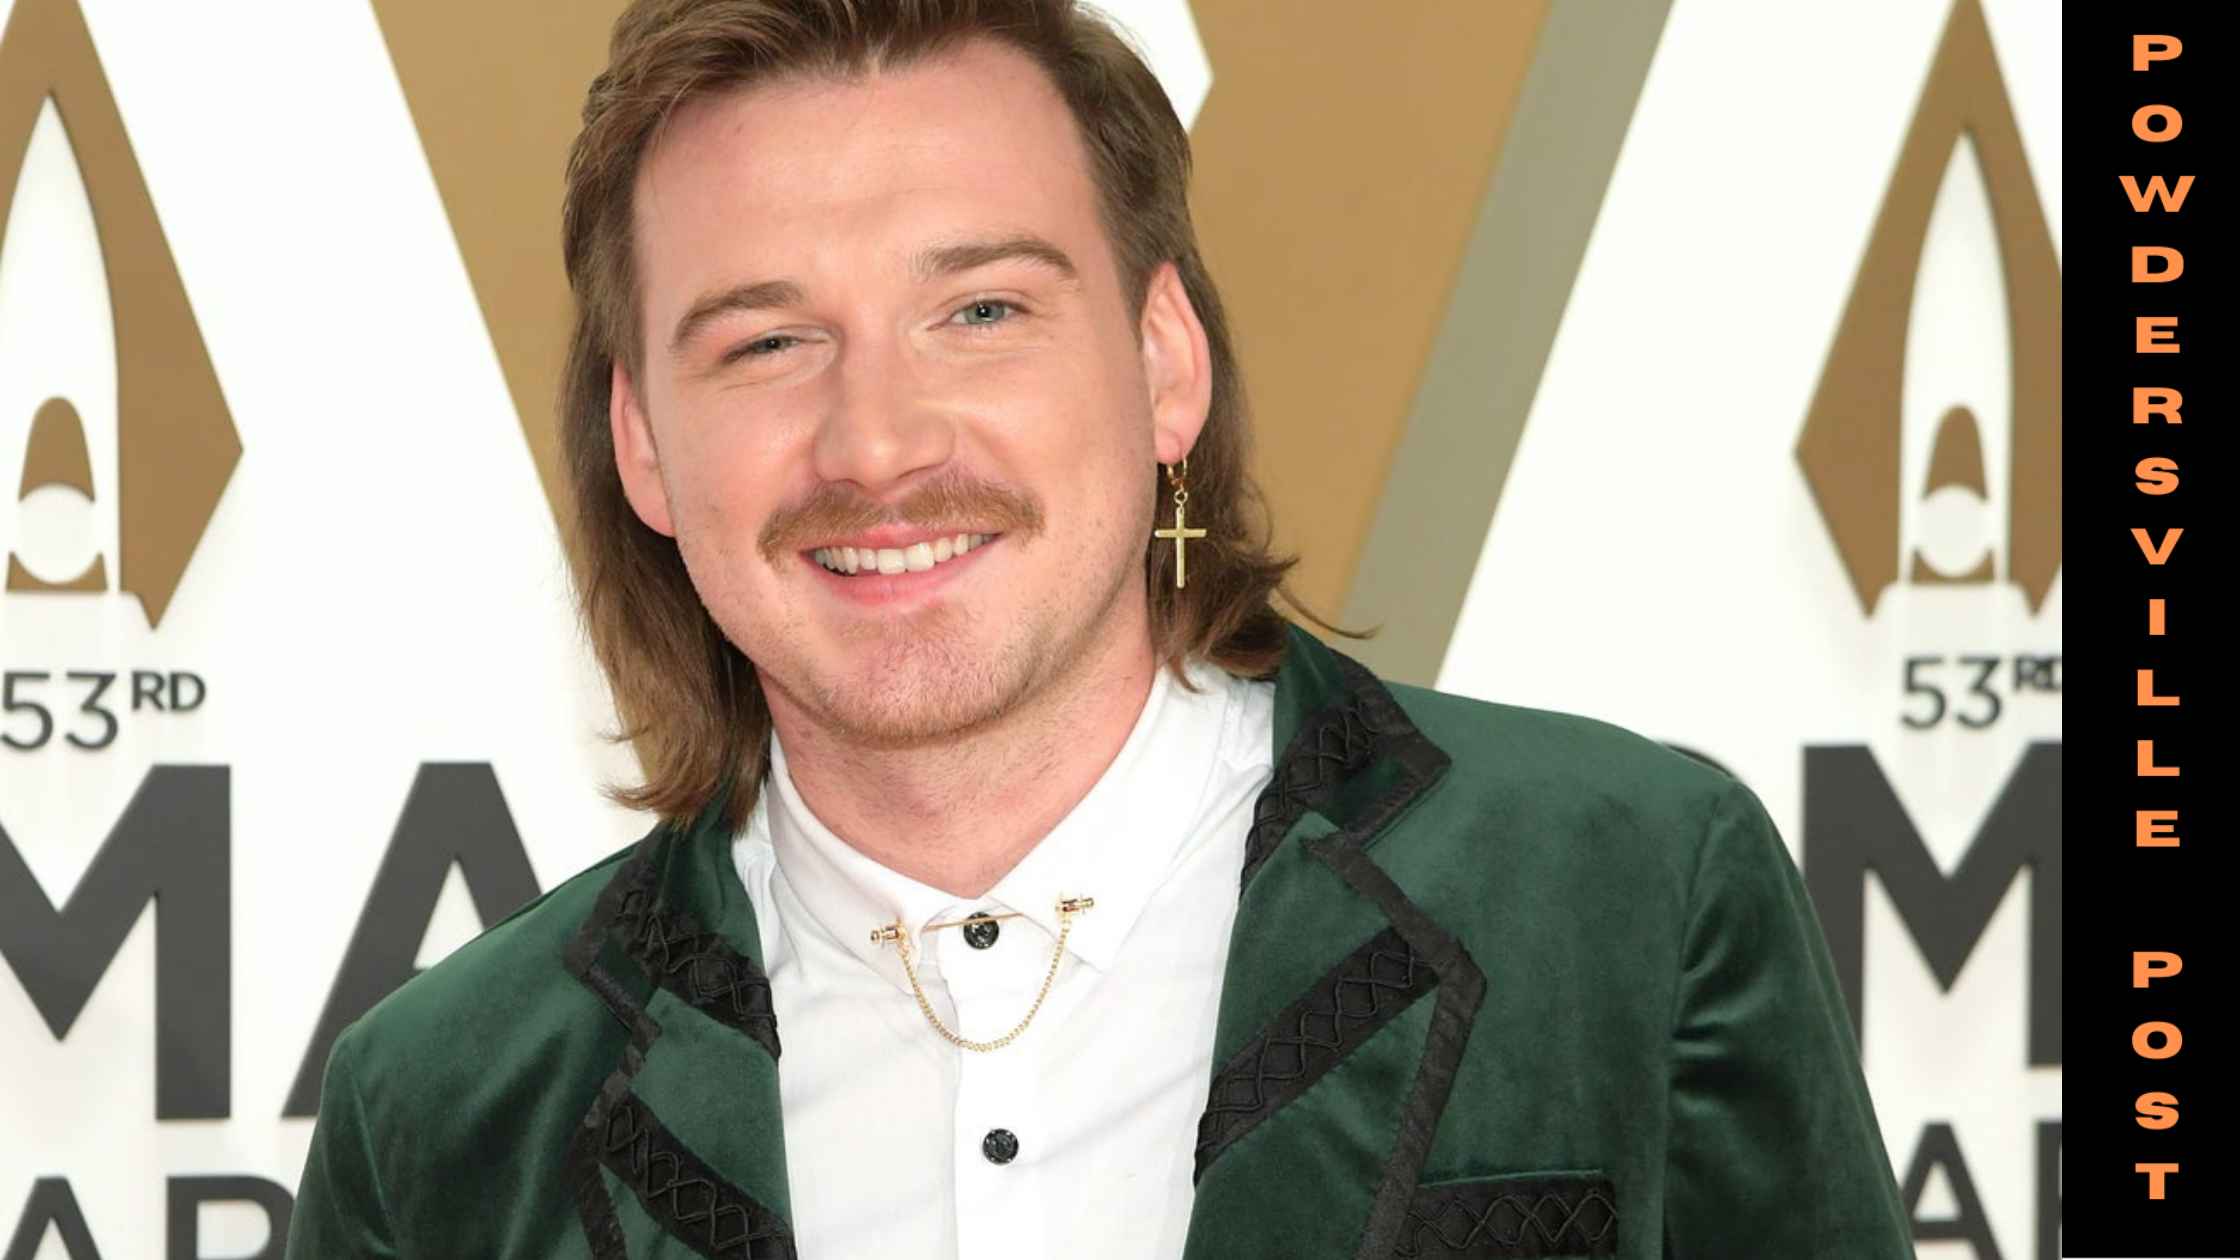 Unknown Facts About Famous Country Singer Morgan Wallen's Net Worth In 2022